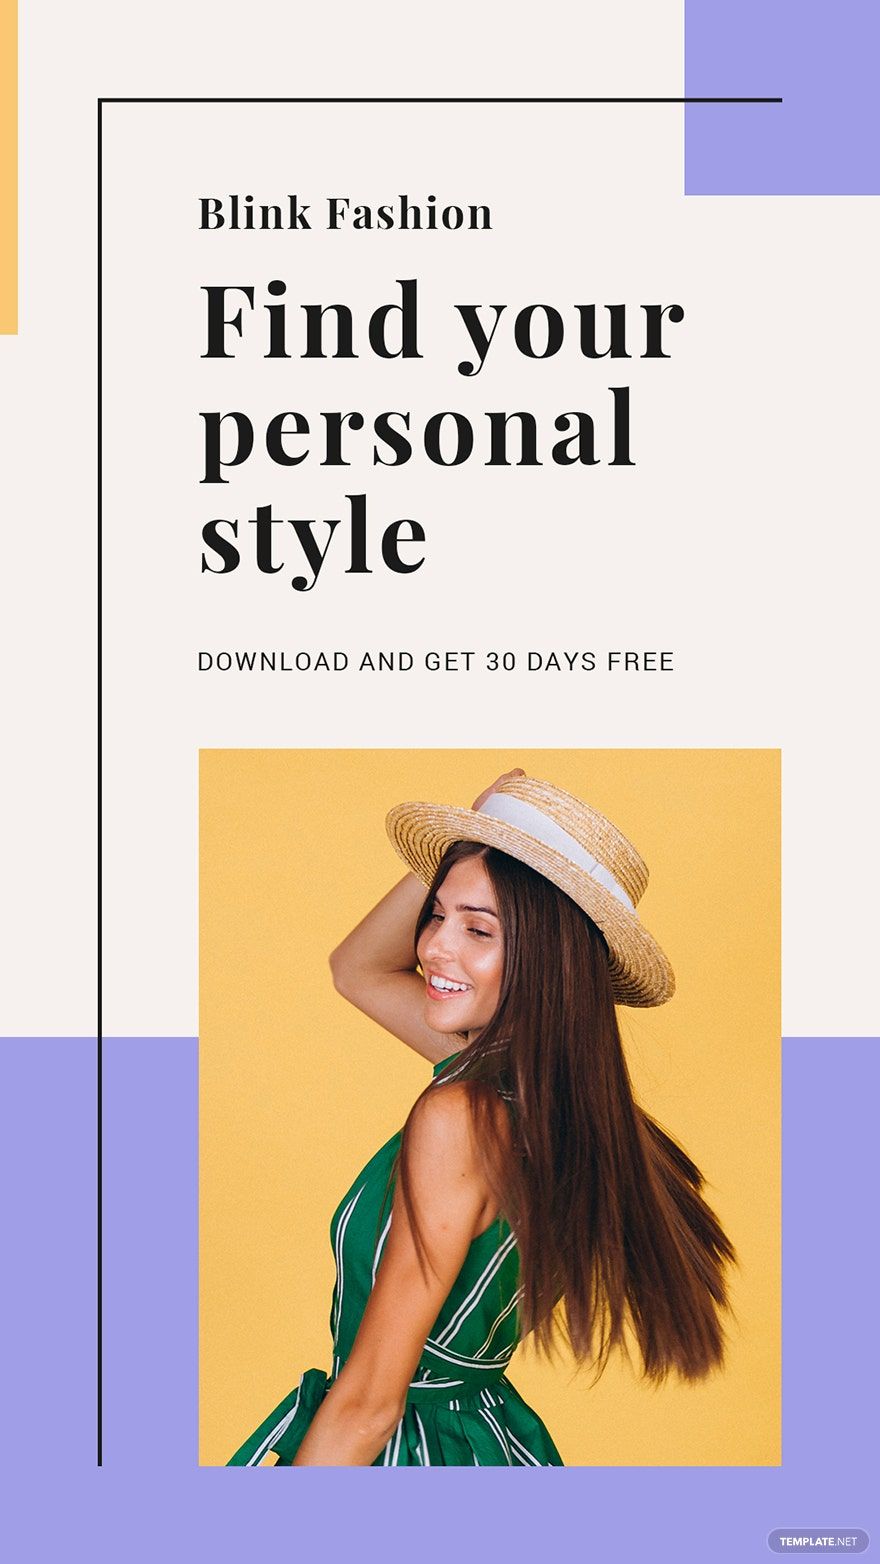 Fashion Brands App Promotion Whatsapp Post Template